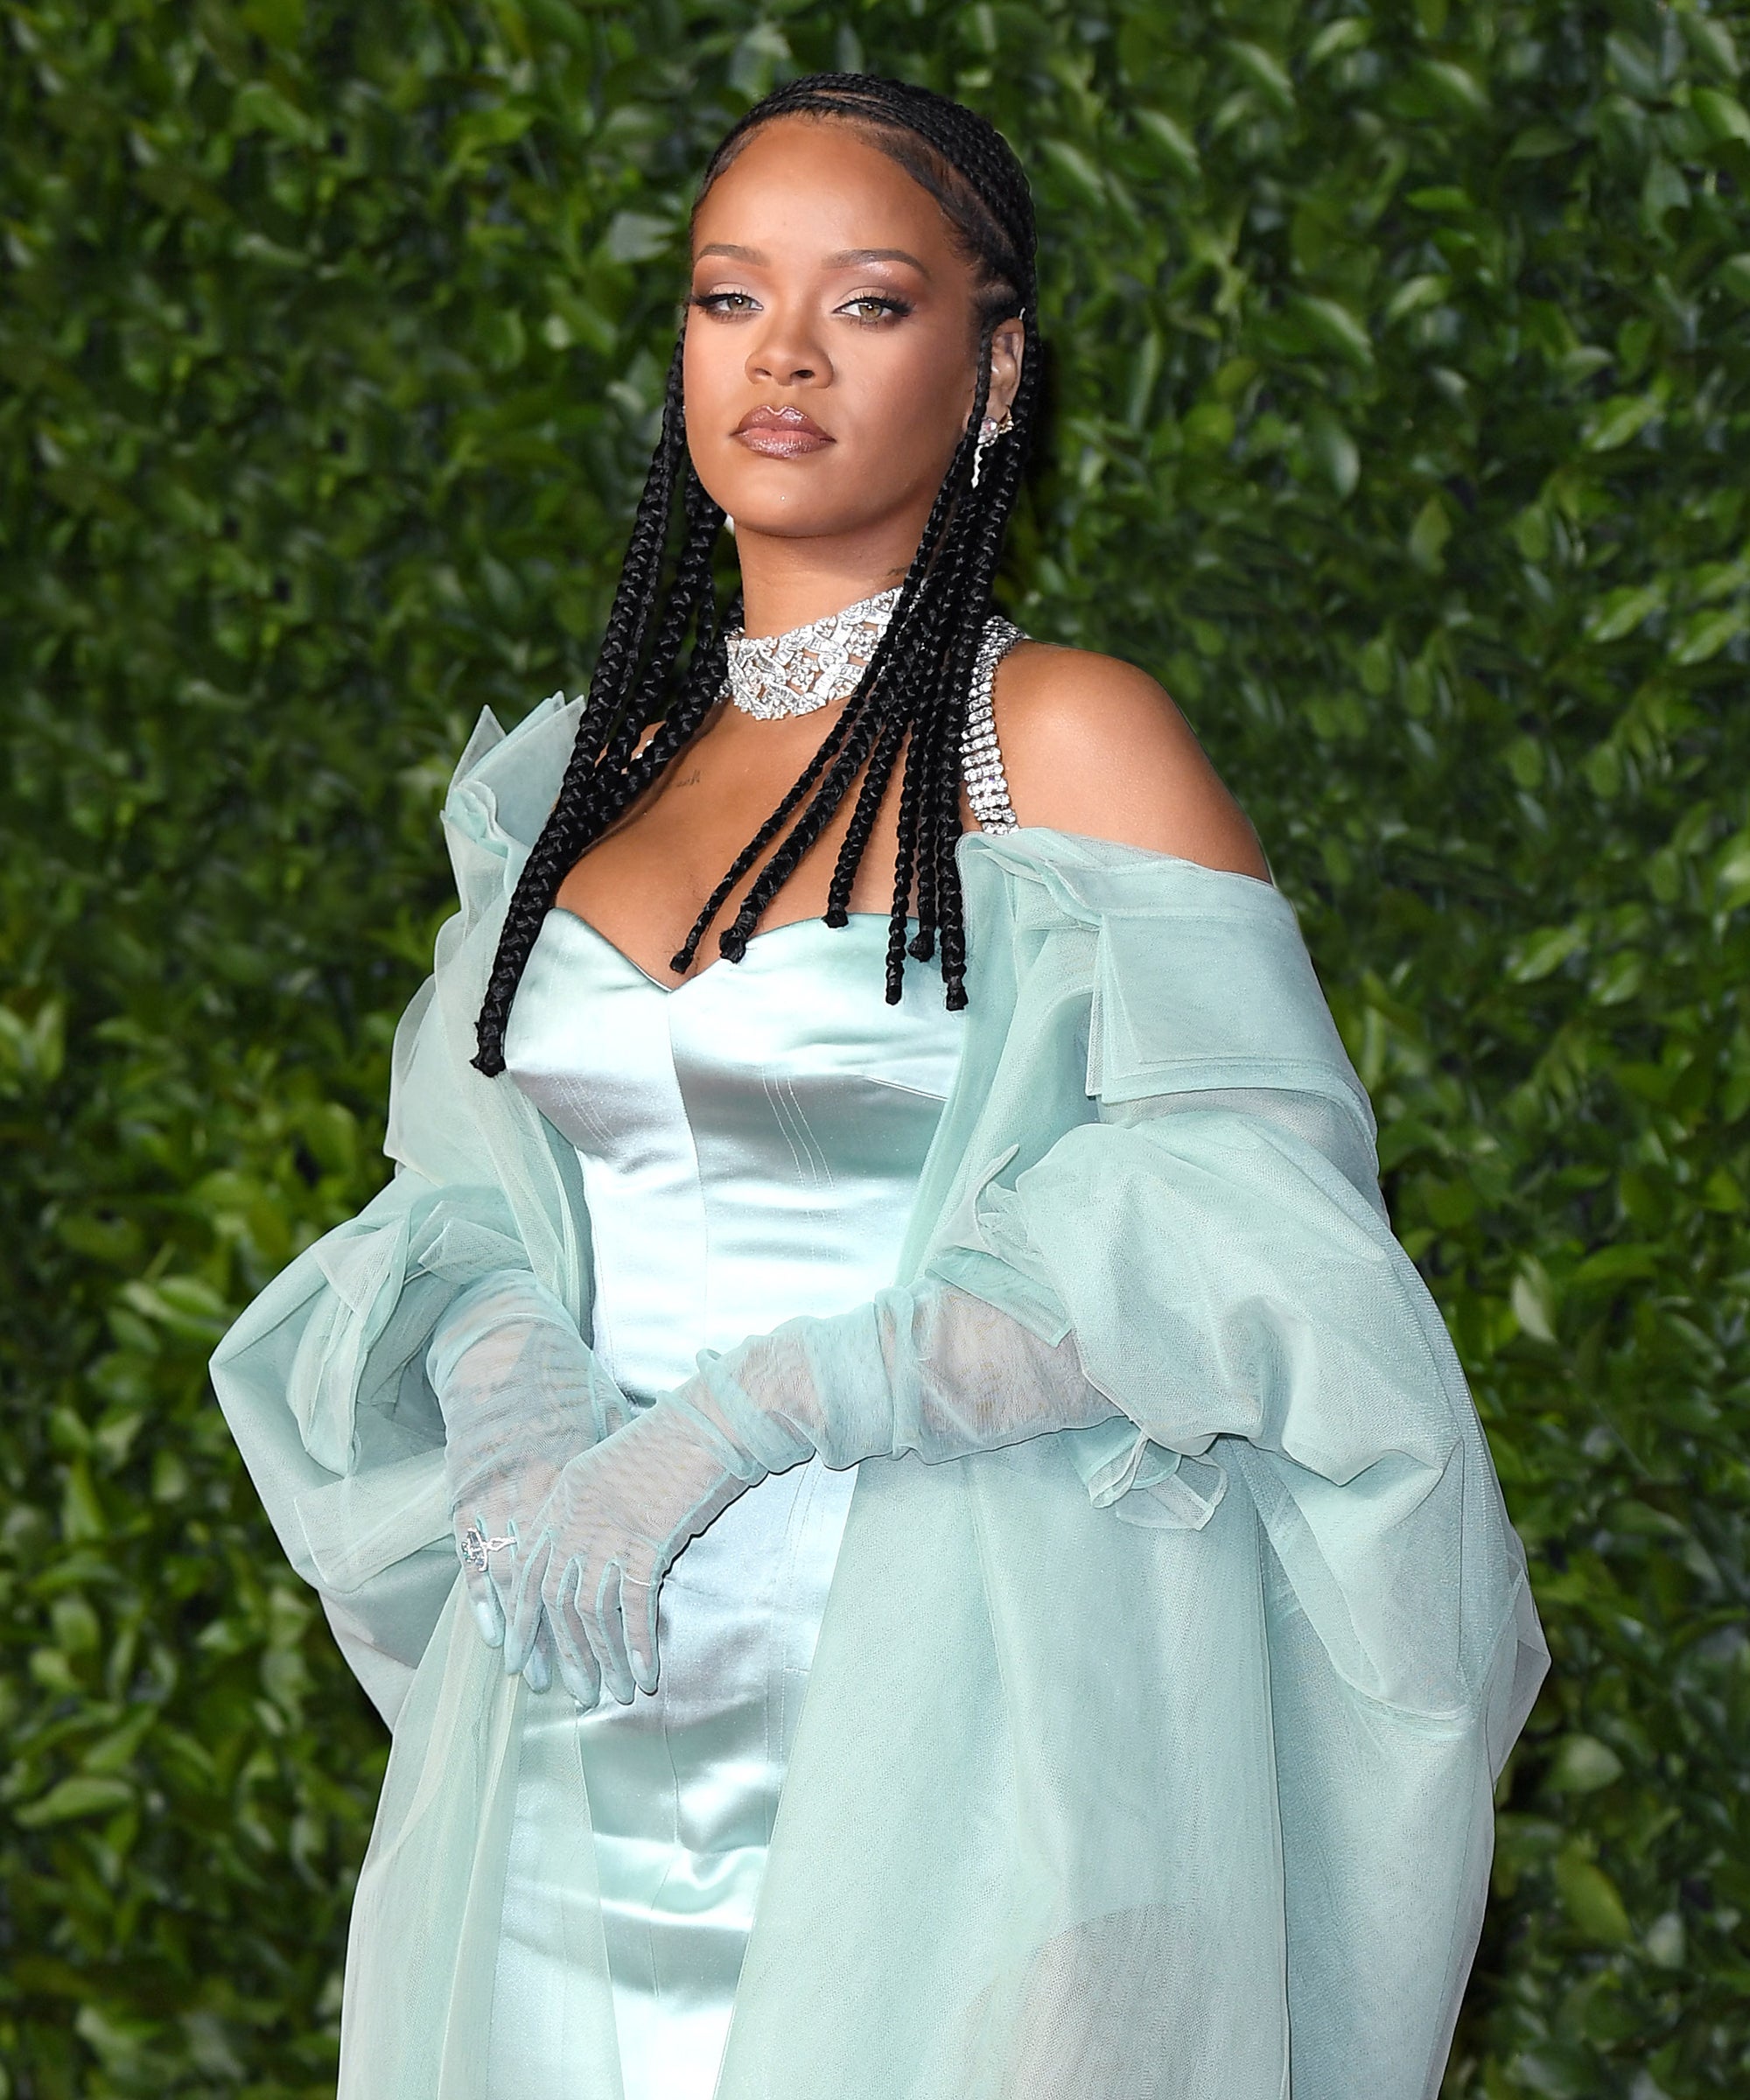 Rihanna Reportedly in Talks to Launch Her Own Luxury Fashion Line